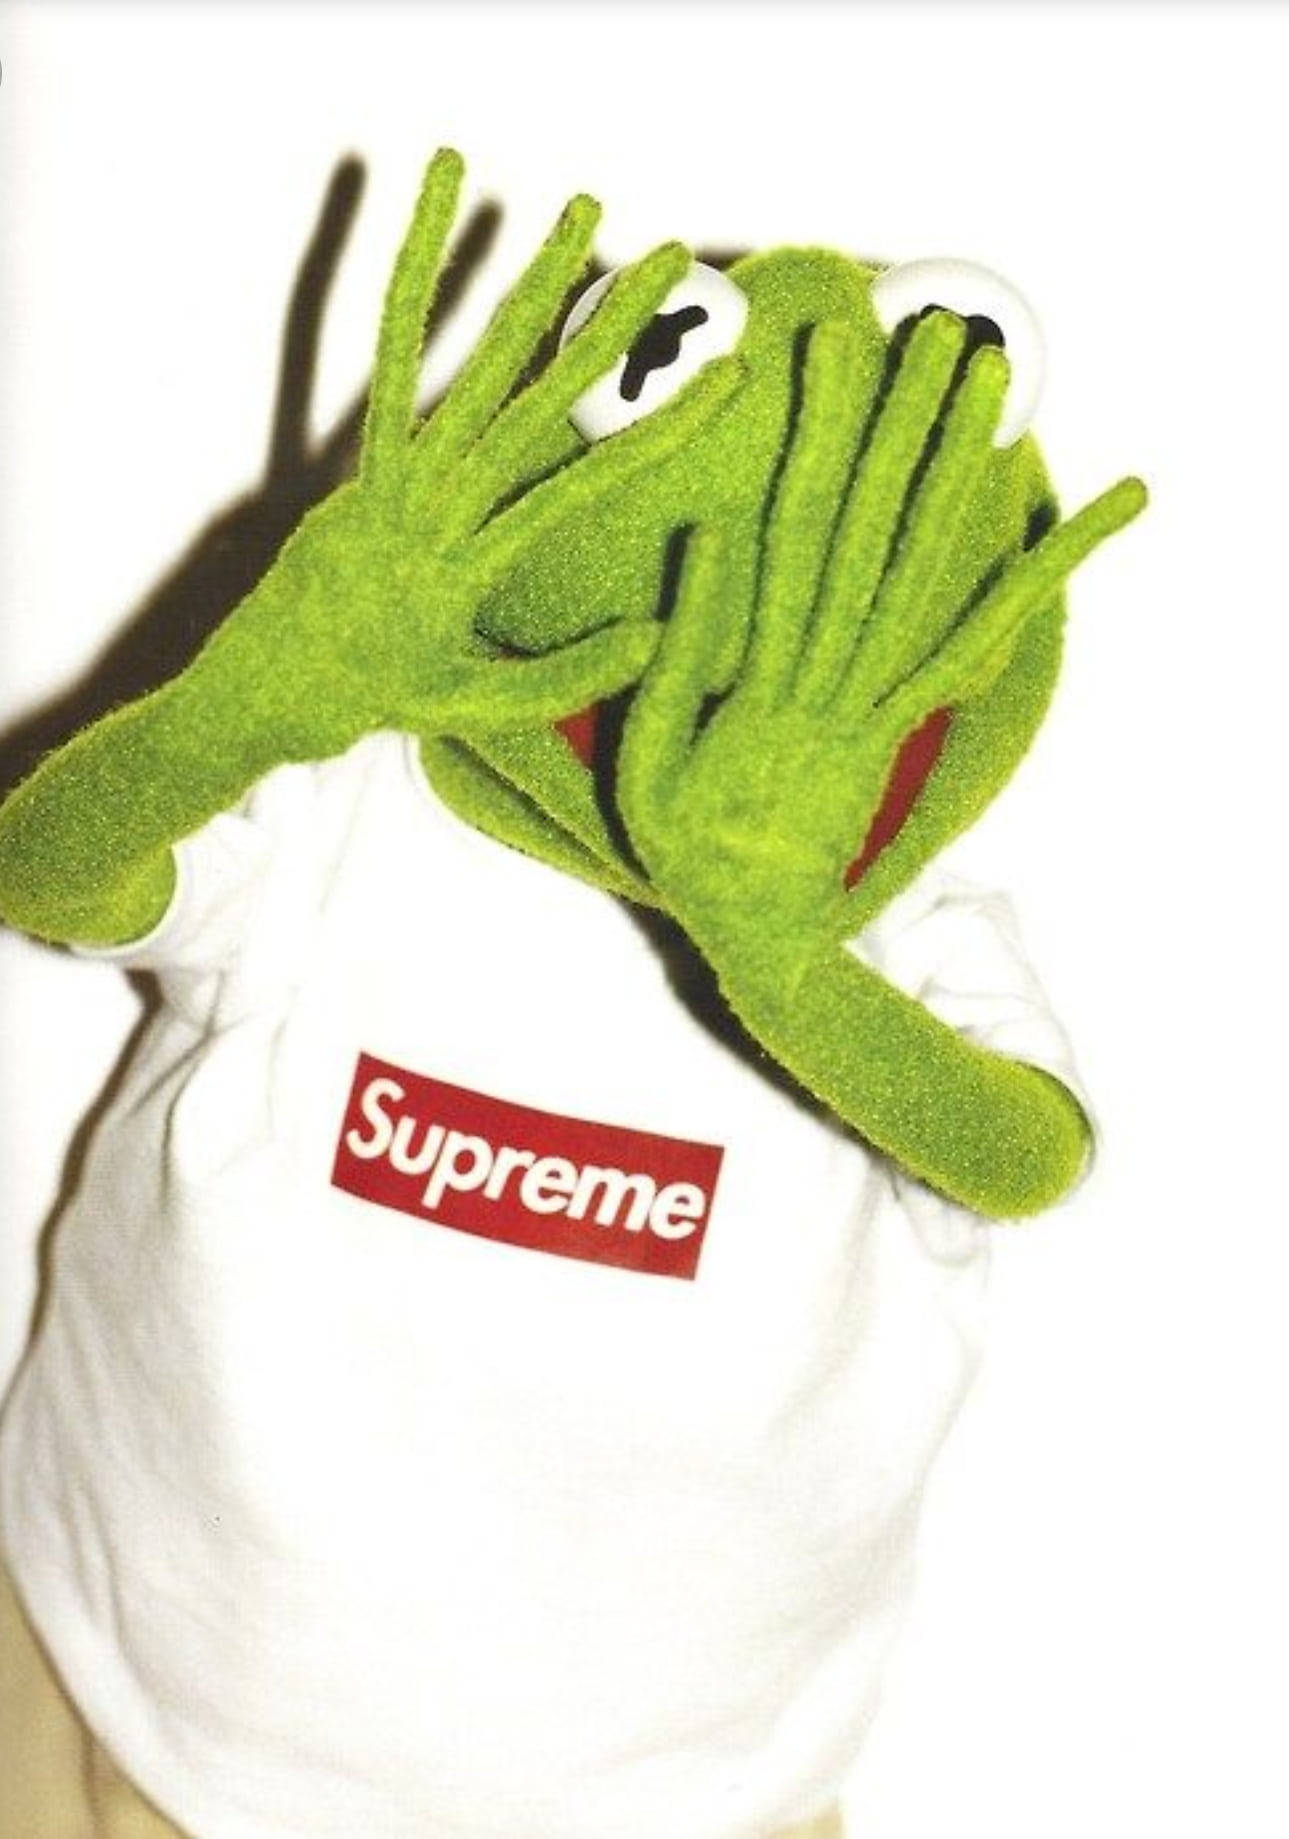 Kermit The Frog The Muppets Supreme Shirt Wallpaper